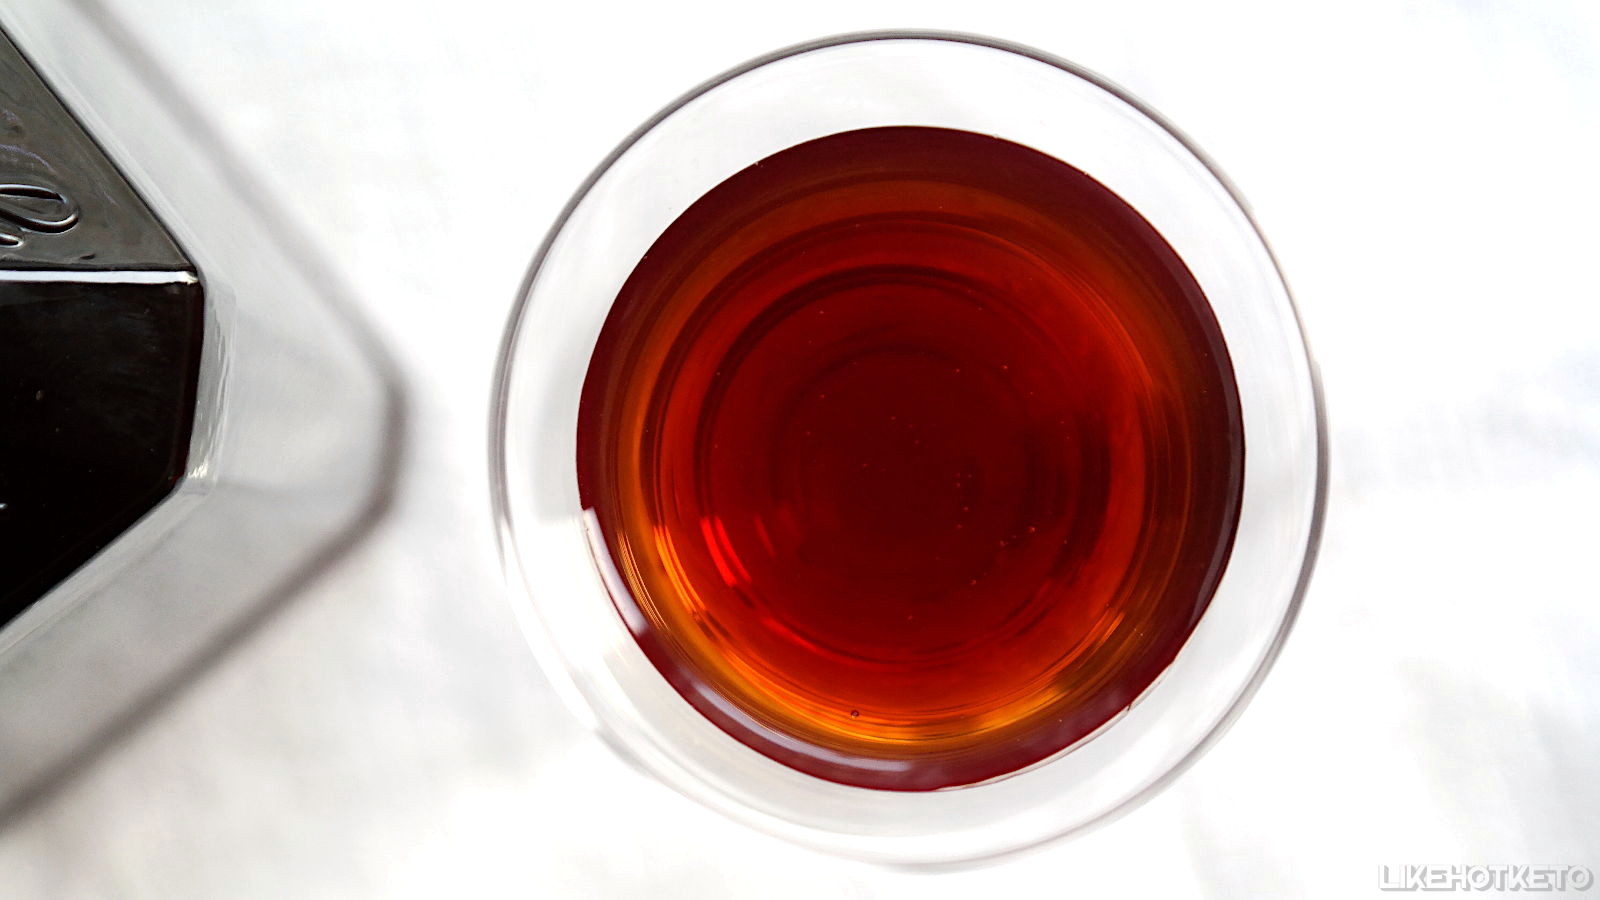 Top view of a glass of DYI cacao liqueur.